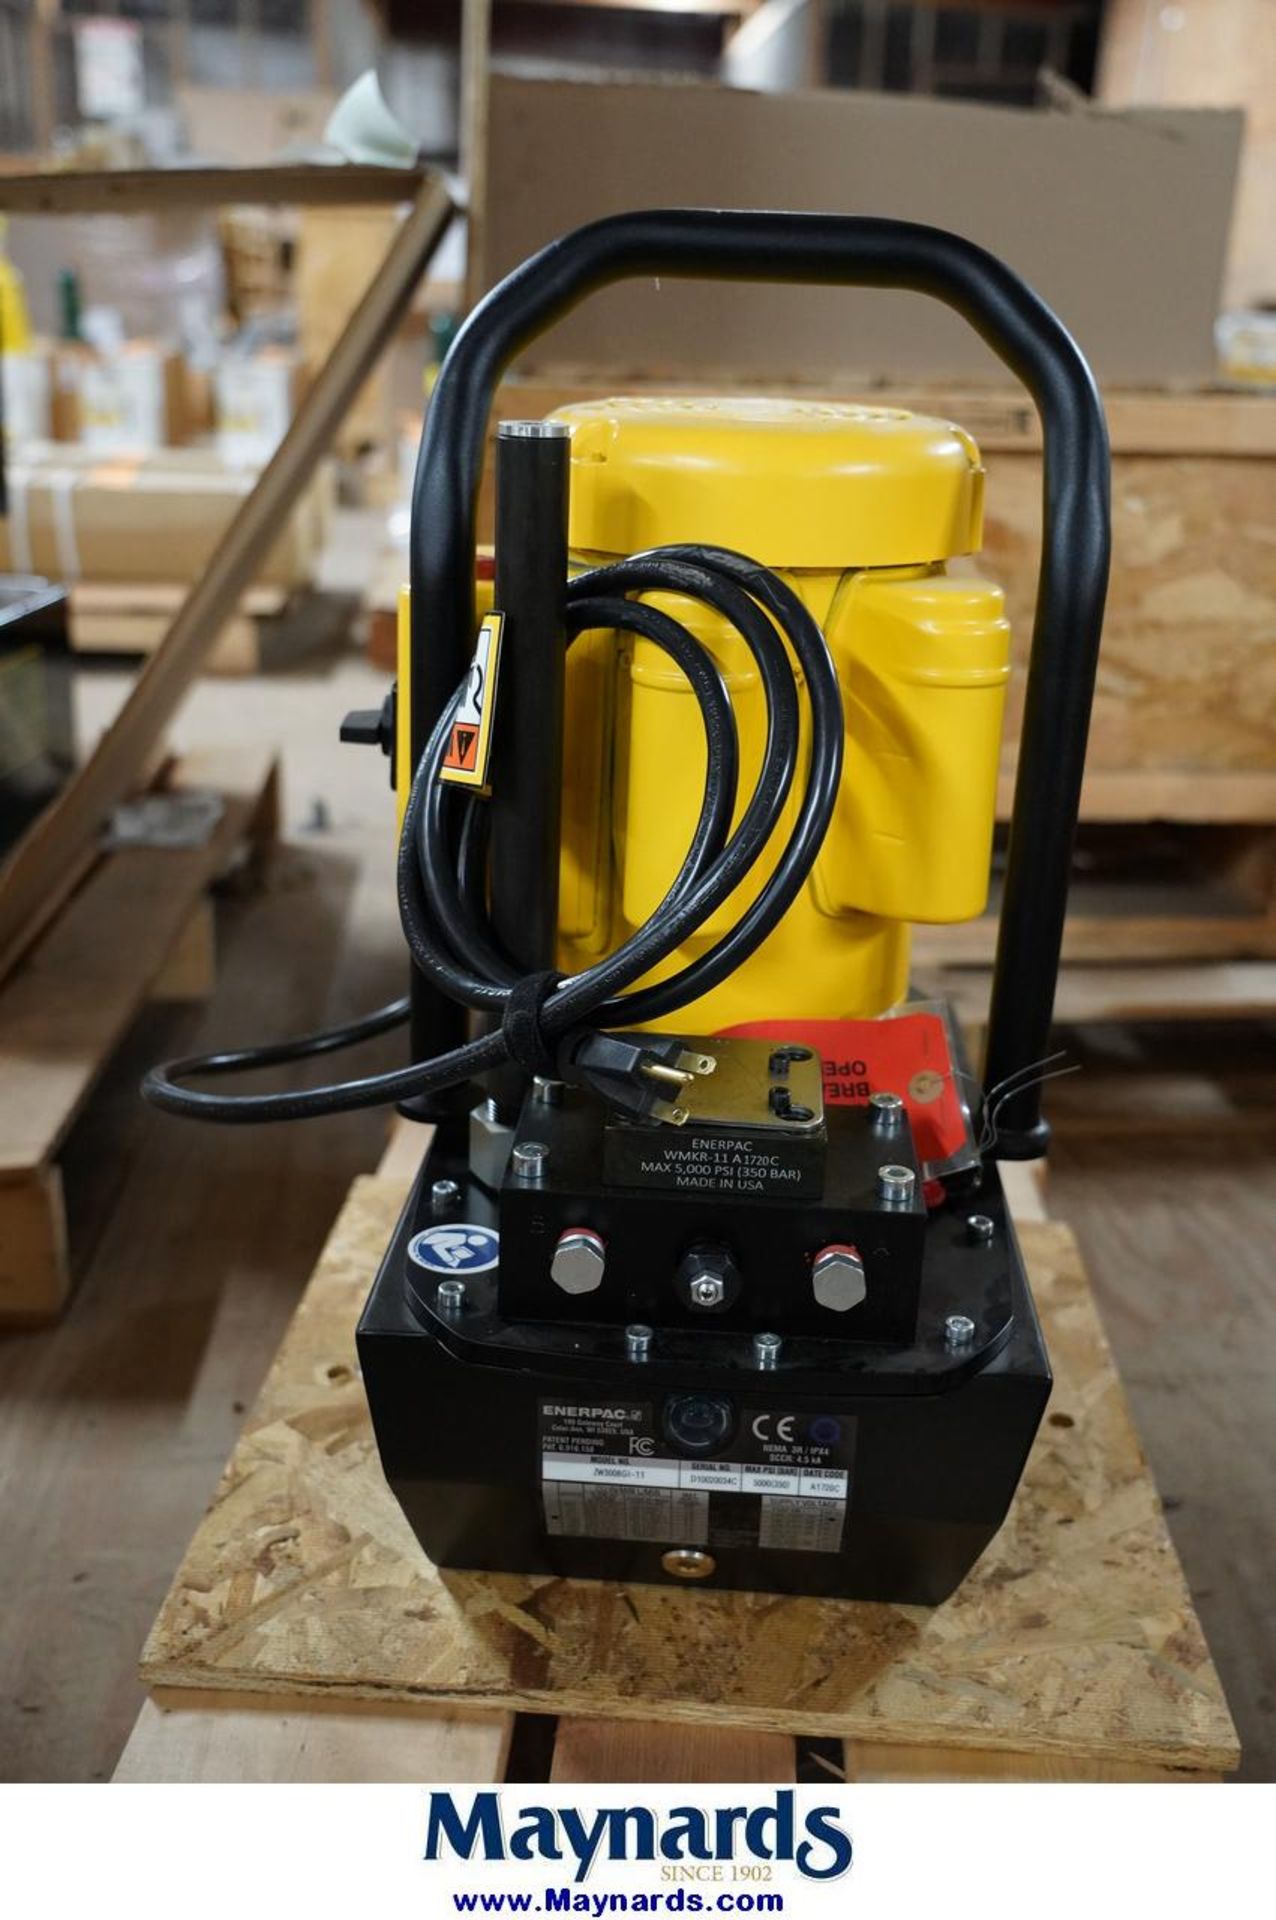 Enerpac ZW3008GI-11 ZE3 Class Electric Hydraulic Work holding Pump - Image 4 of 6